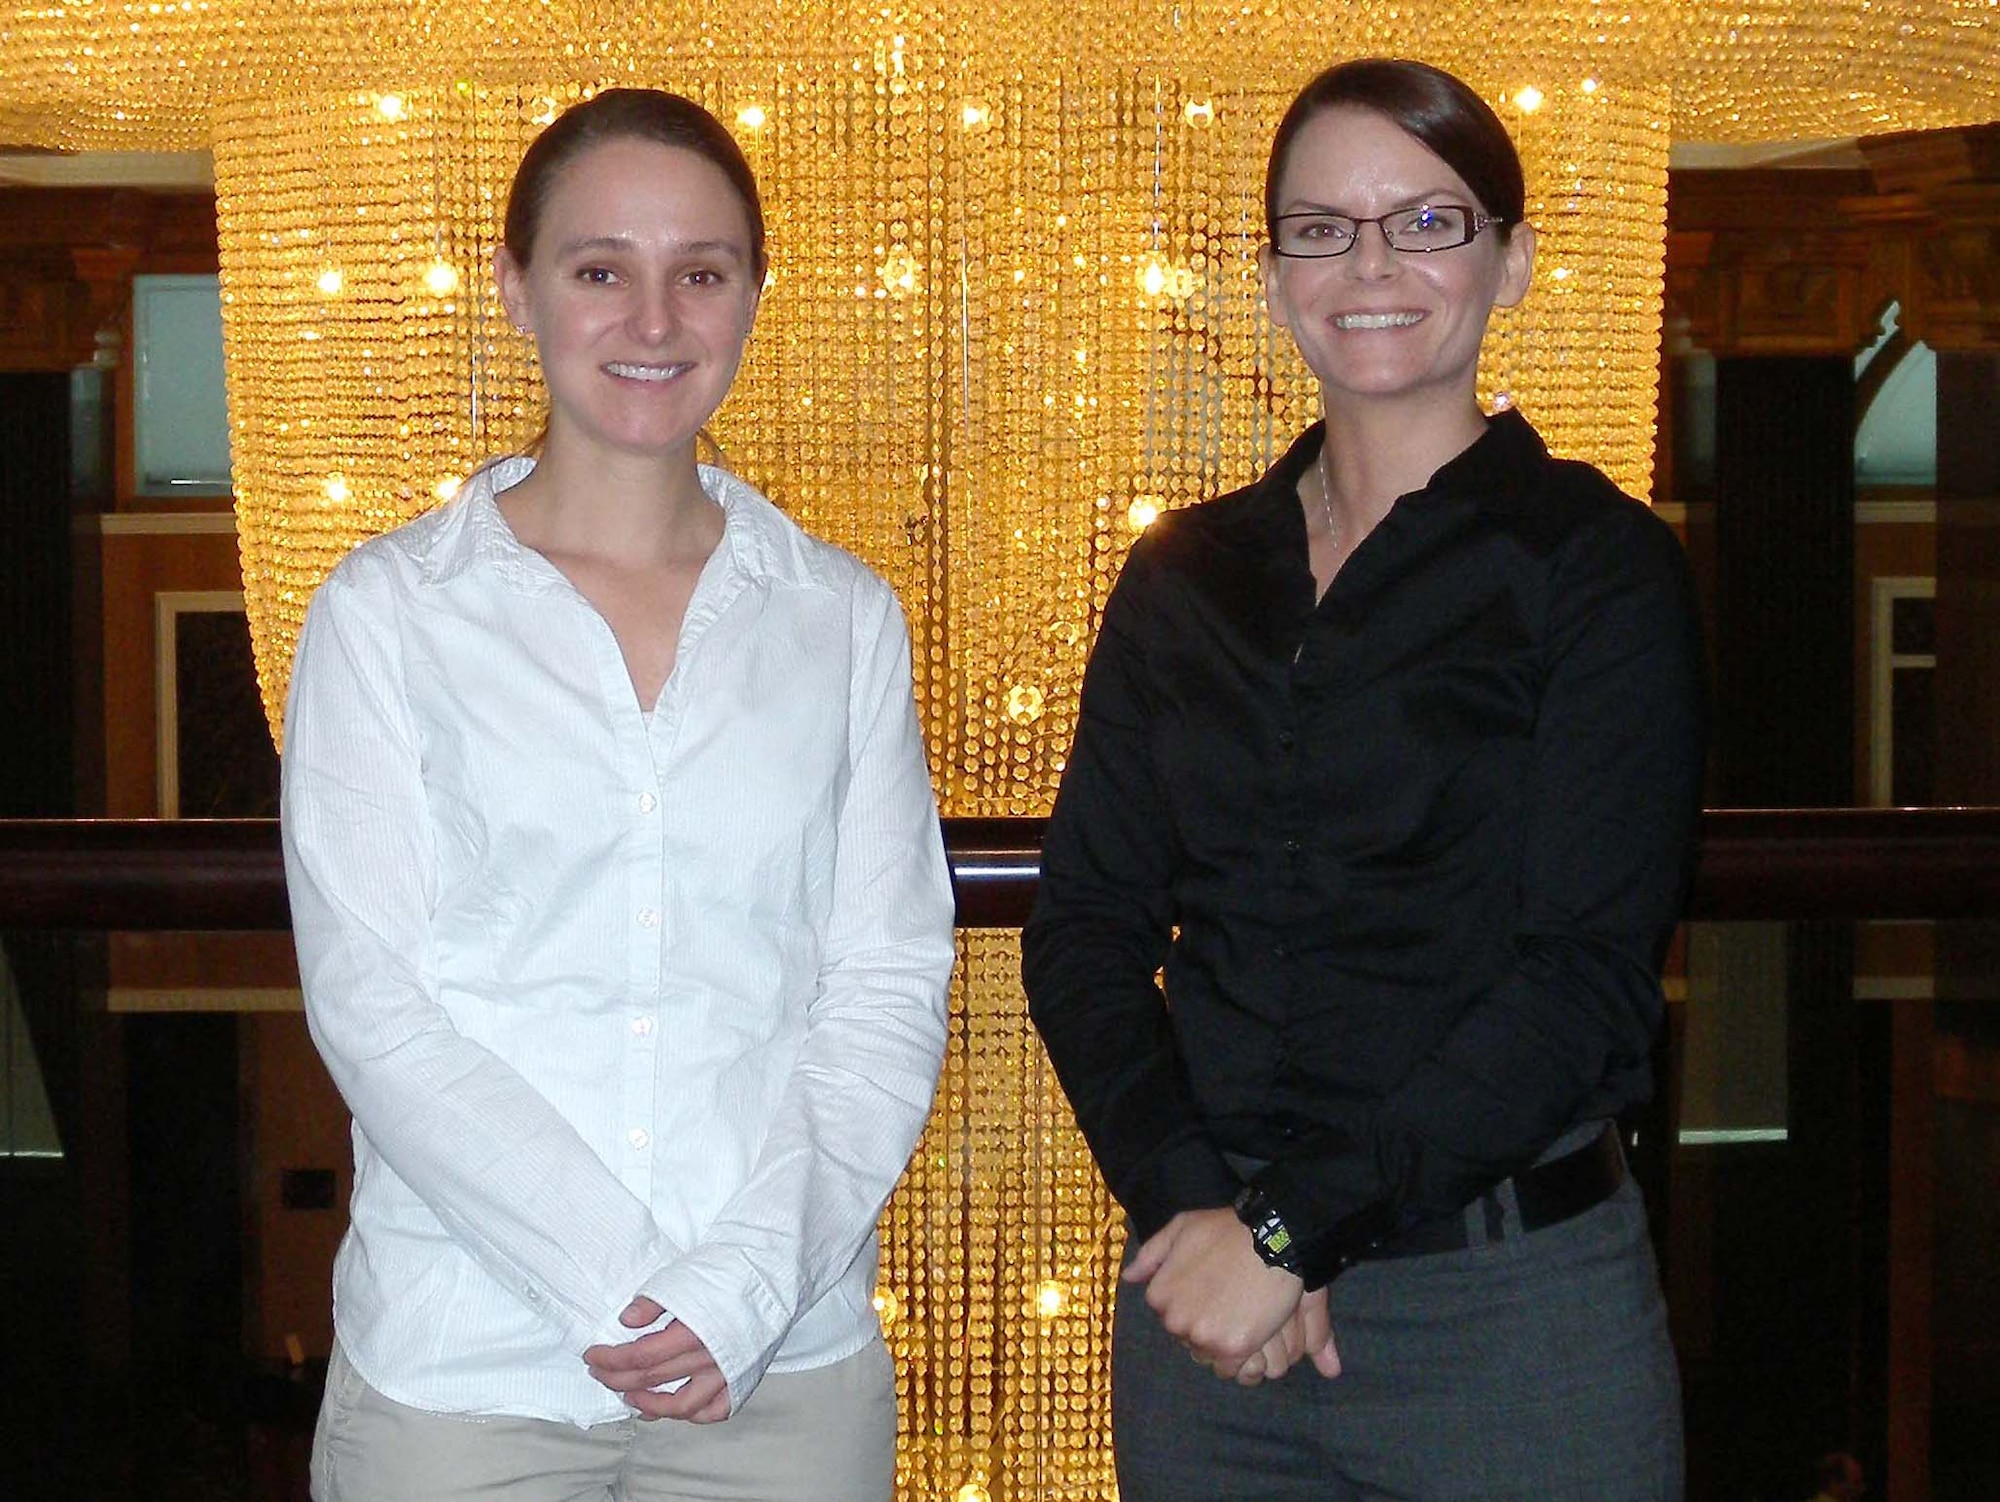 Air Force Office of Special Investigations Special Agents Megan Rauch and Sue Lantrip stop for a photo after a conference held in Southwest Asia. SA Rauch and SA Lantrip were among seven members that attended the conference which informed government and civilian contractors about their jobs as International Contract Corruption Task Force members. (U.S. Air Force Photo by Staff Sgt. Anthony Graham)